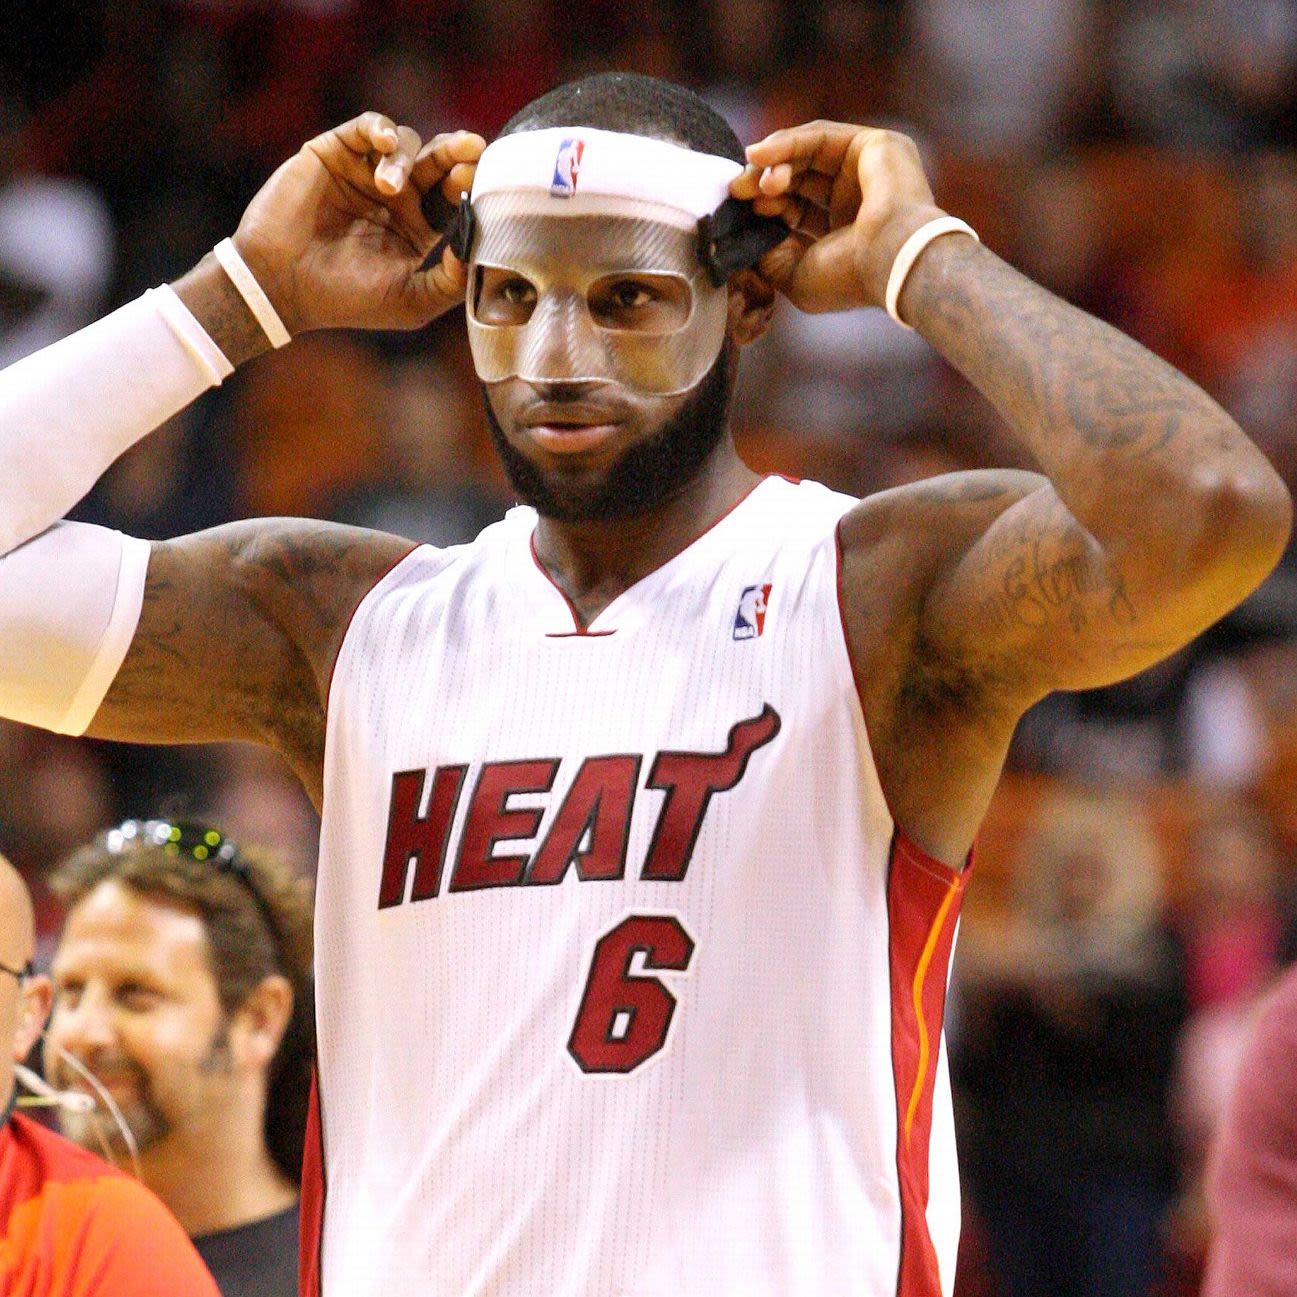 History of NBA players in masks and face guards